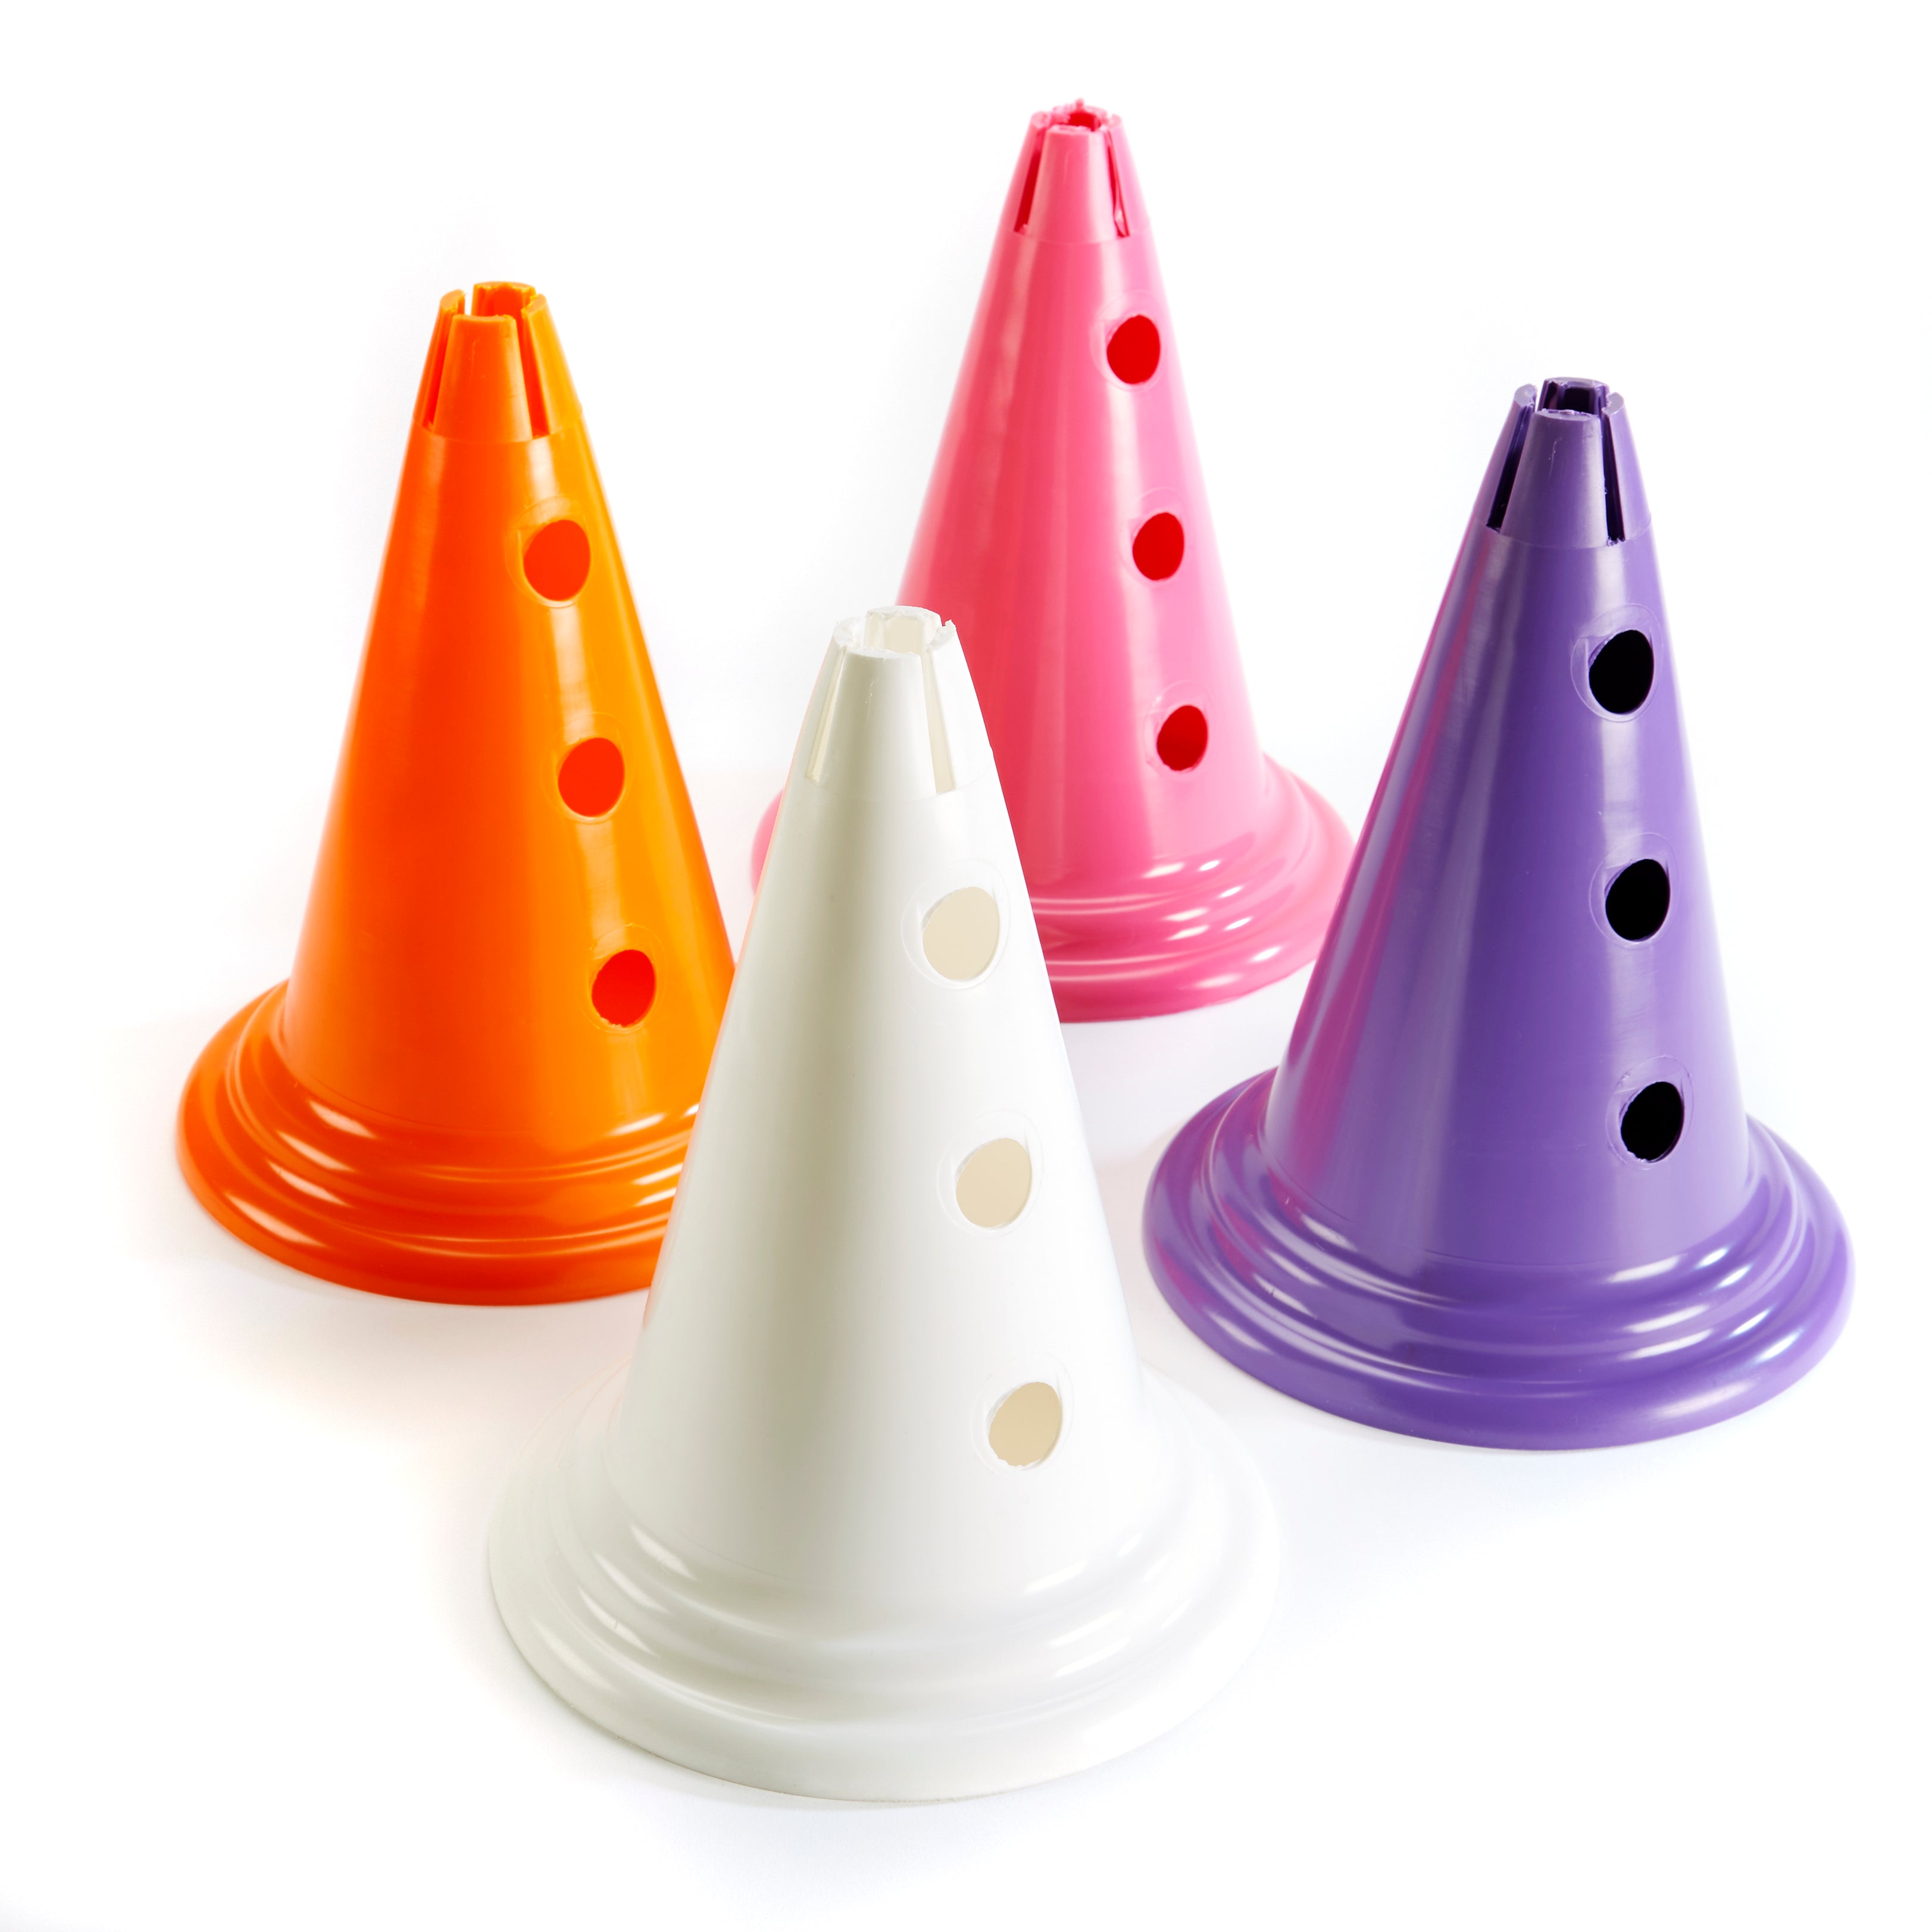 30cm marker cones with three holes to support poles, in a set of four - pink, orange, purple and white